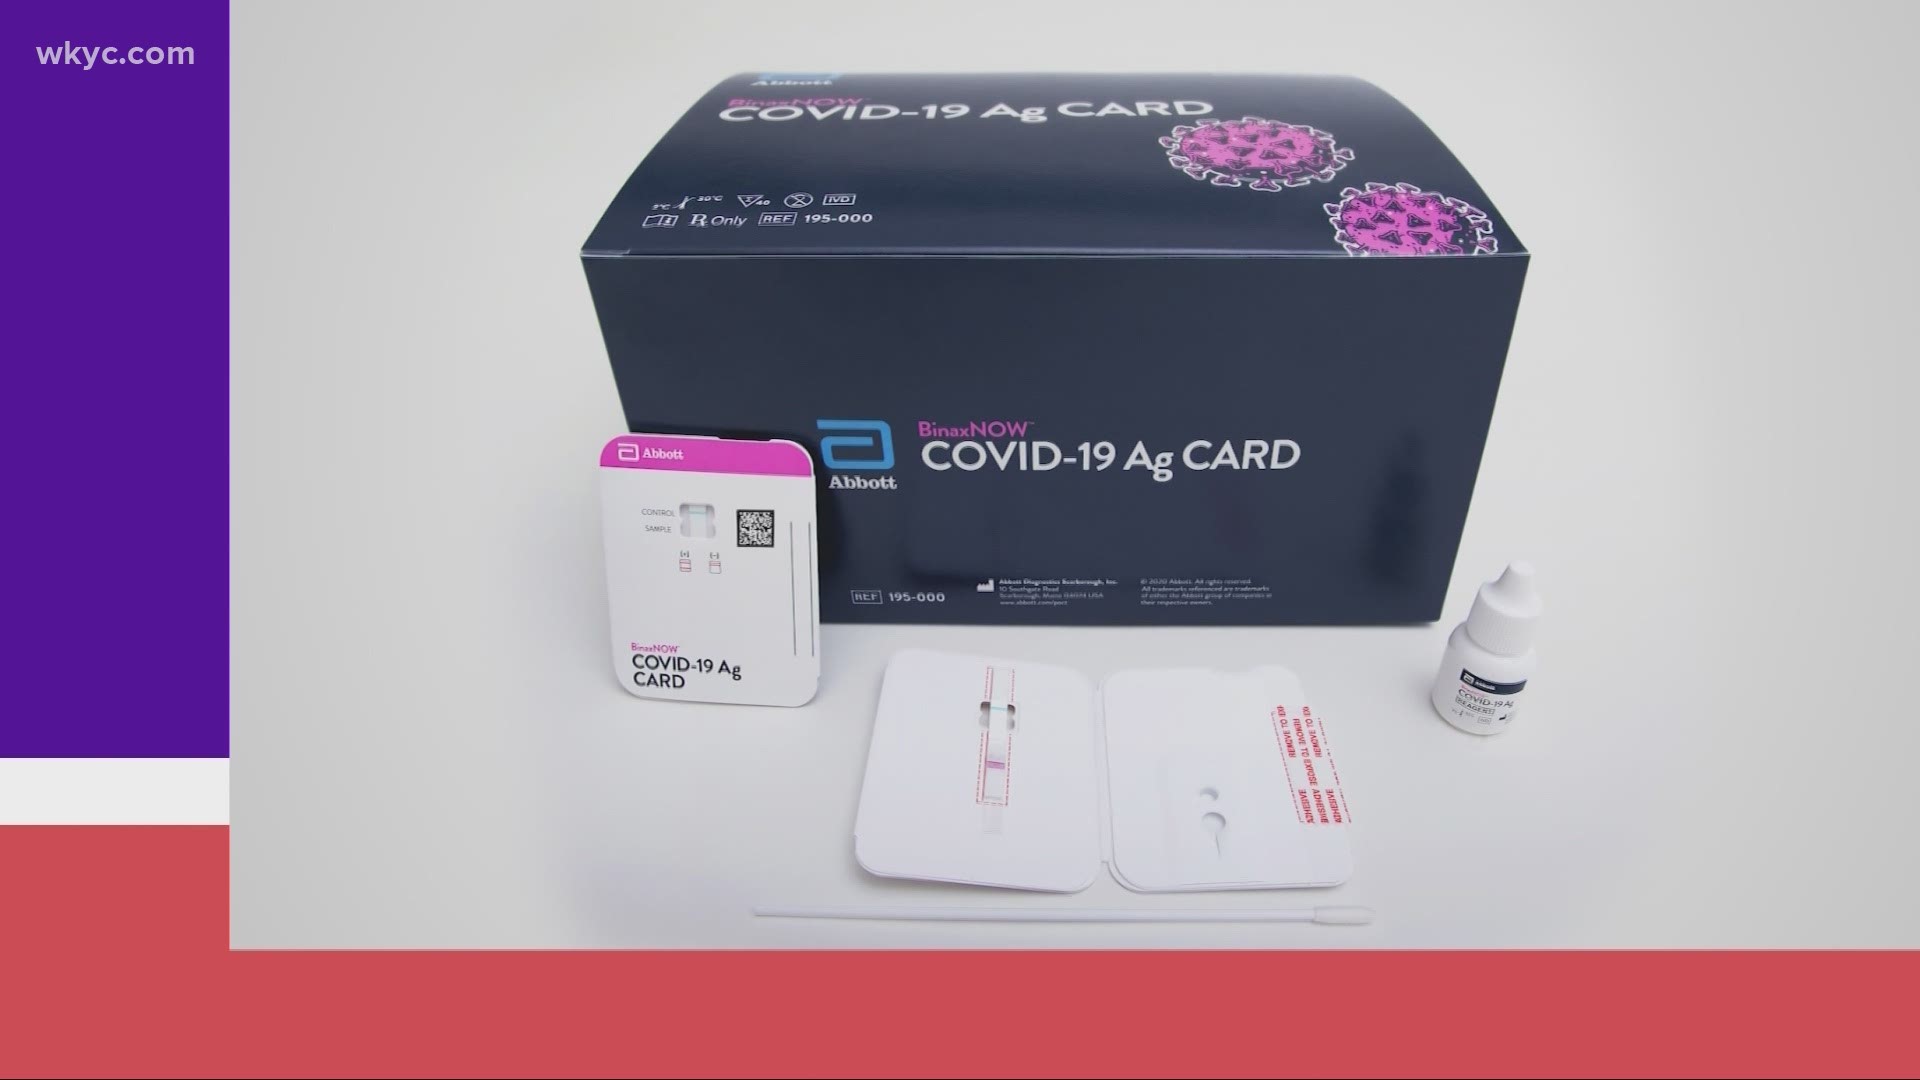 Ohio will purchase at least 2 million at-home BinaxNow COVID rapid antigen tests. They can be self-administered with results in about 15 minutes.